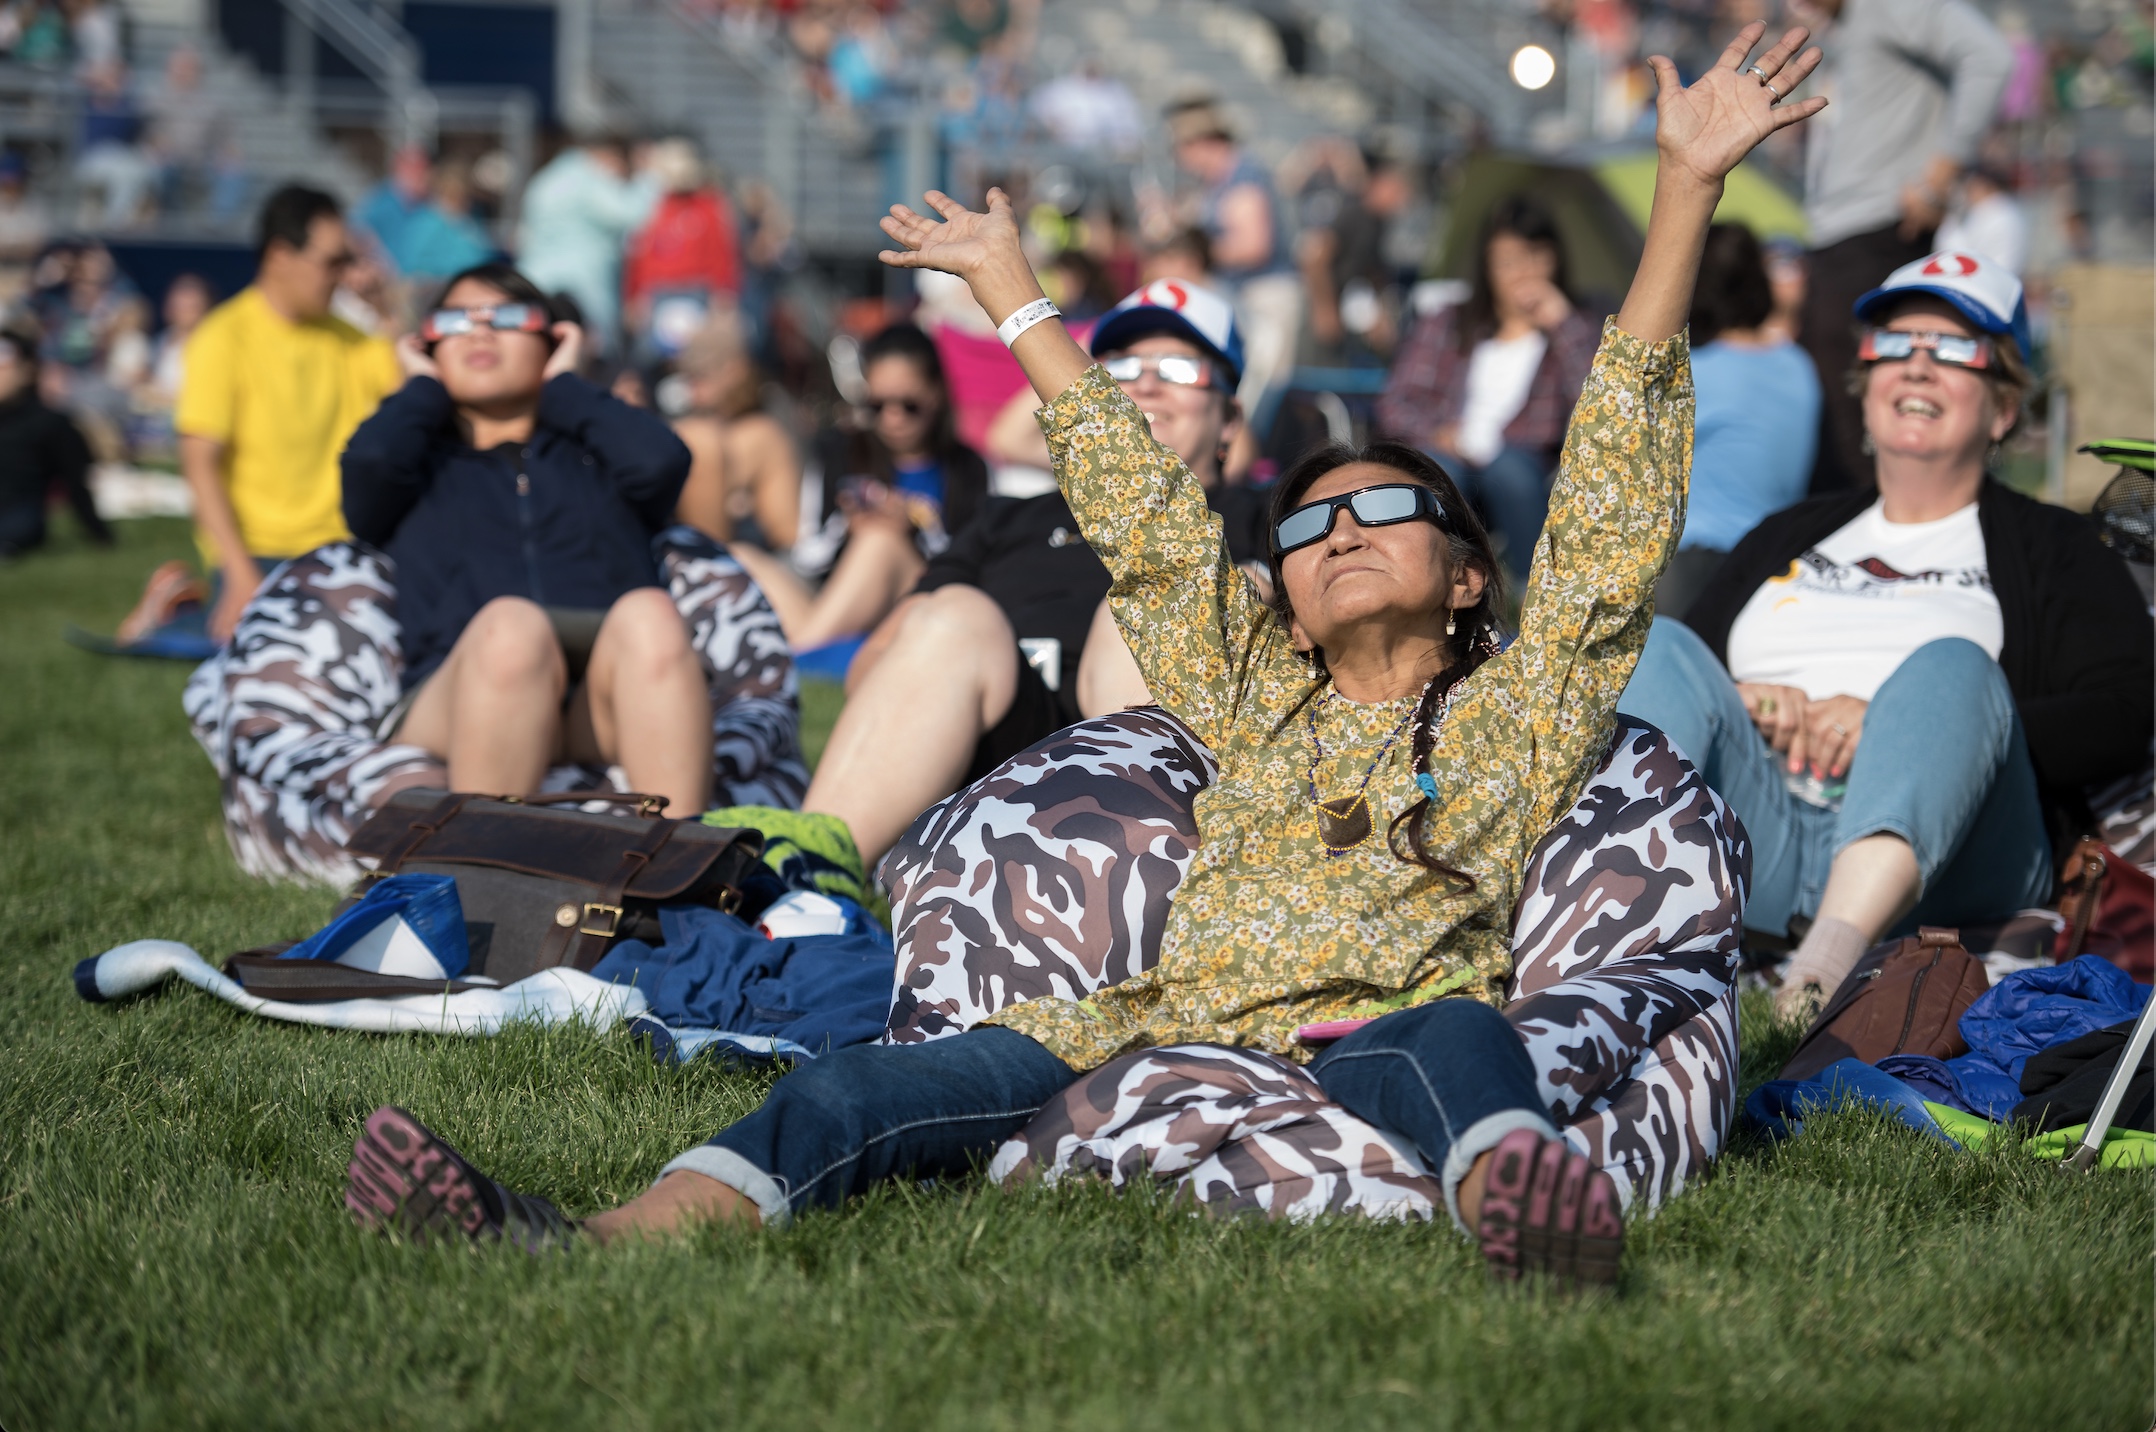 A woman wearing eclipse glasses gazes up and stretches her hands and arms to the sky in celebration of such an amazing experience. Other people can be seen in the background, also wearing eclipse glasses and enjoying the view.